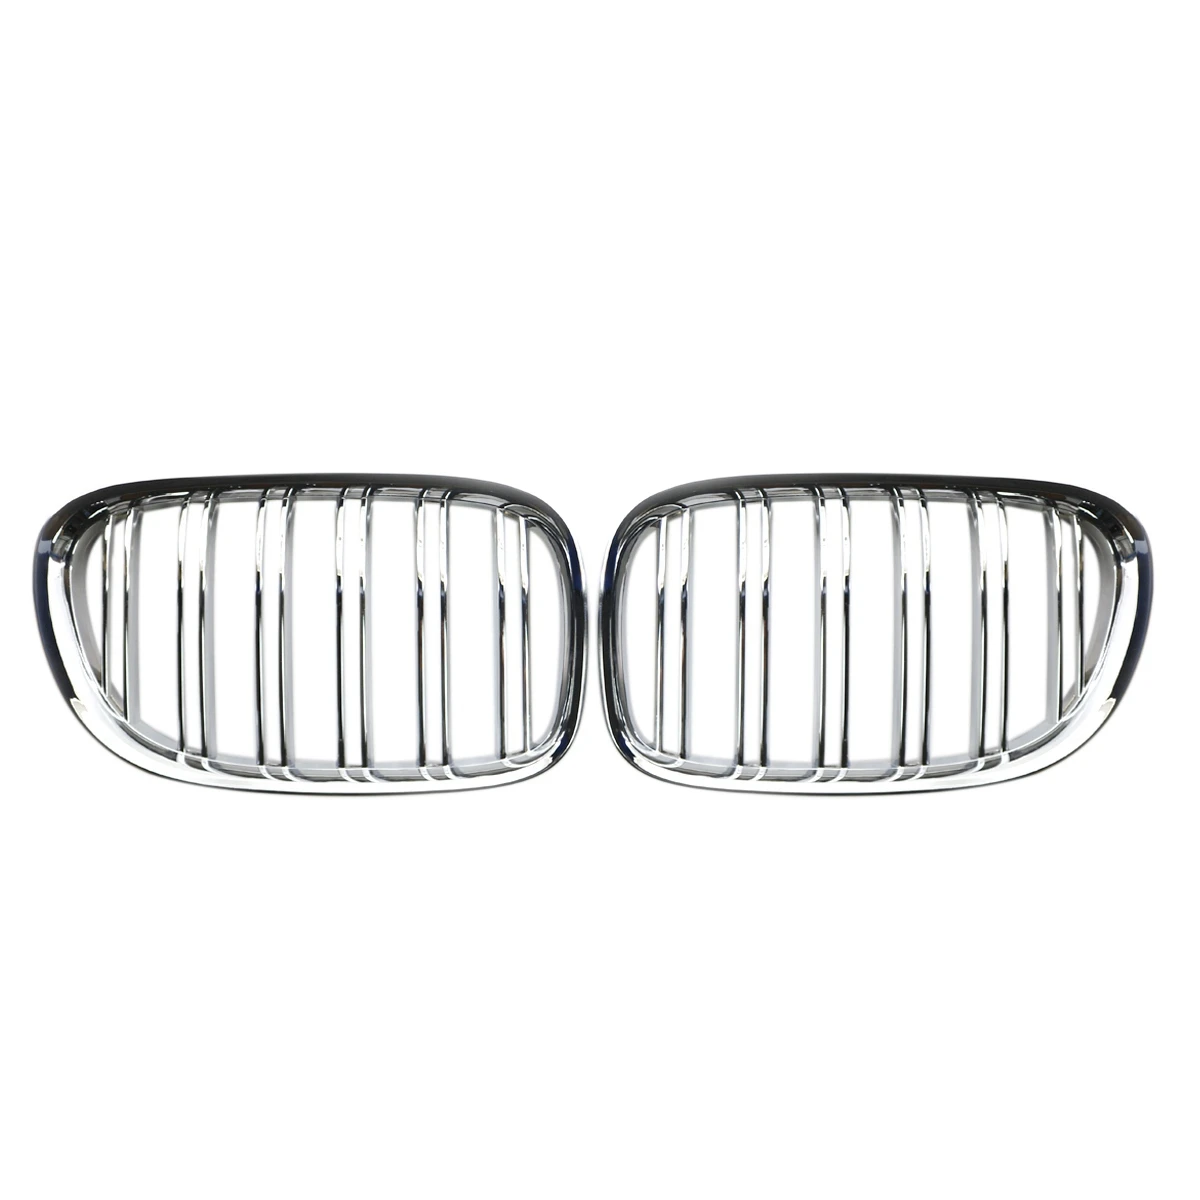 

Front Kidney Dual Slat Grille for - F01 F02 7 Series 2009-2015 Chrome Grill 51117184151 51117184152